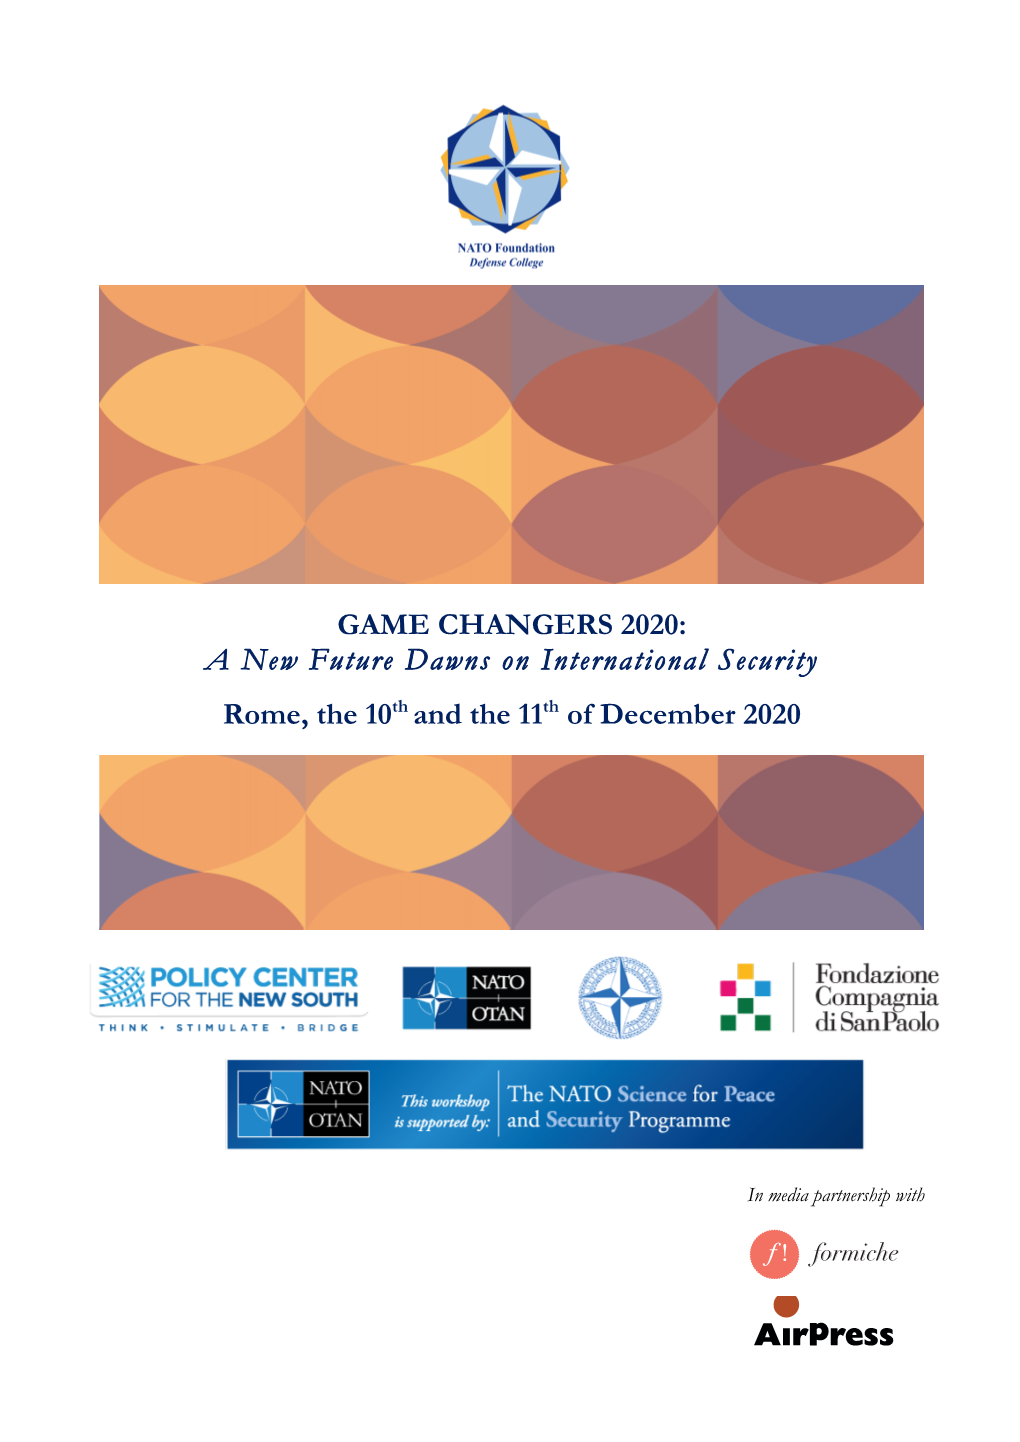 GAME CHANGERS 2020: a New Future Dawns on International Security